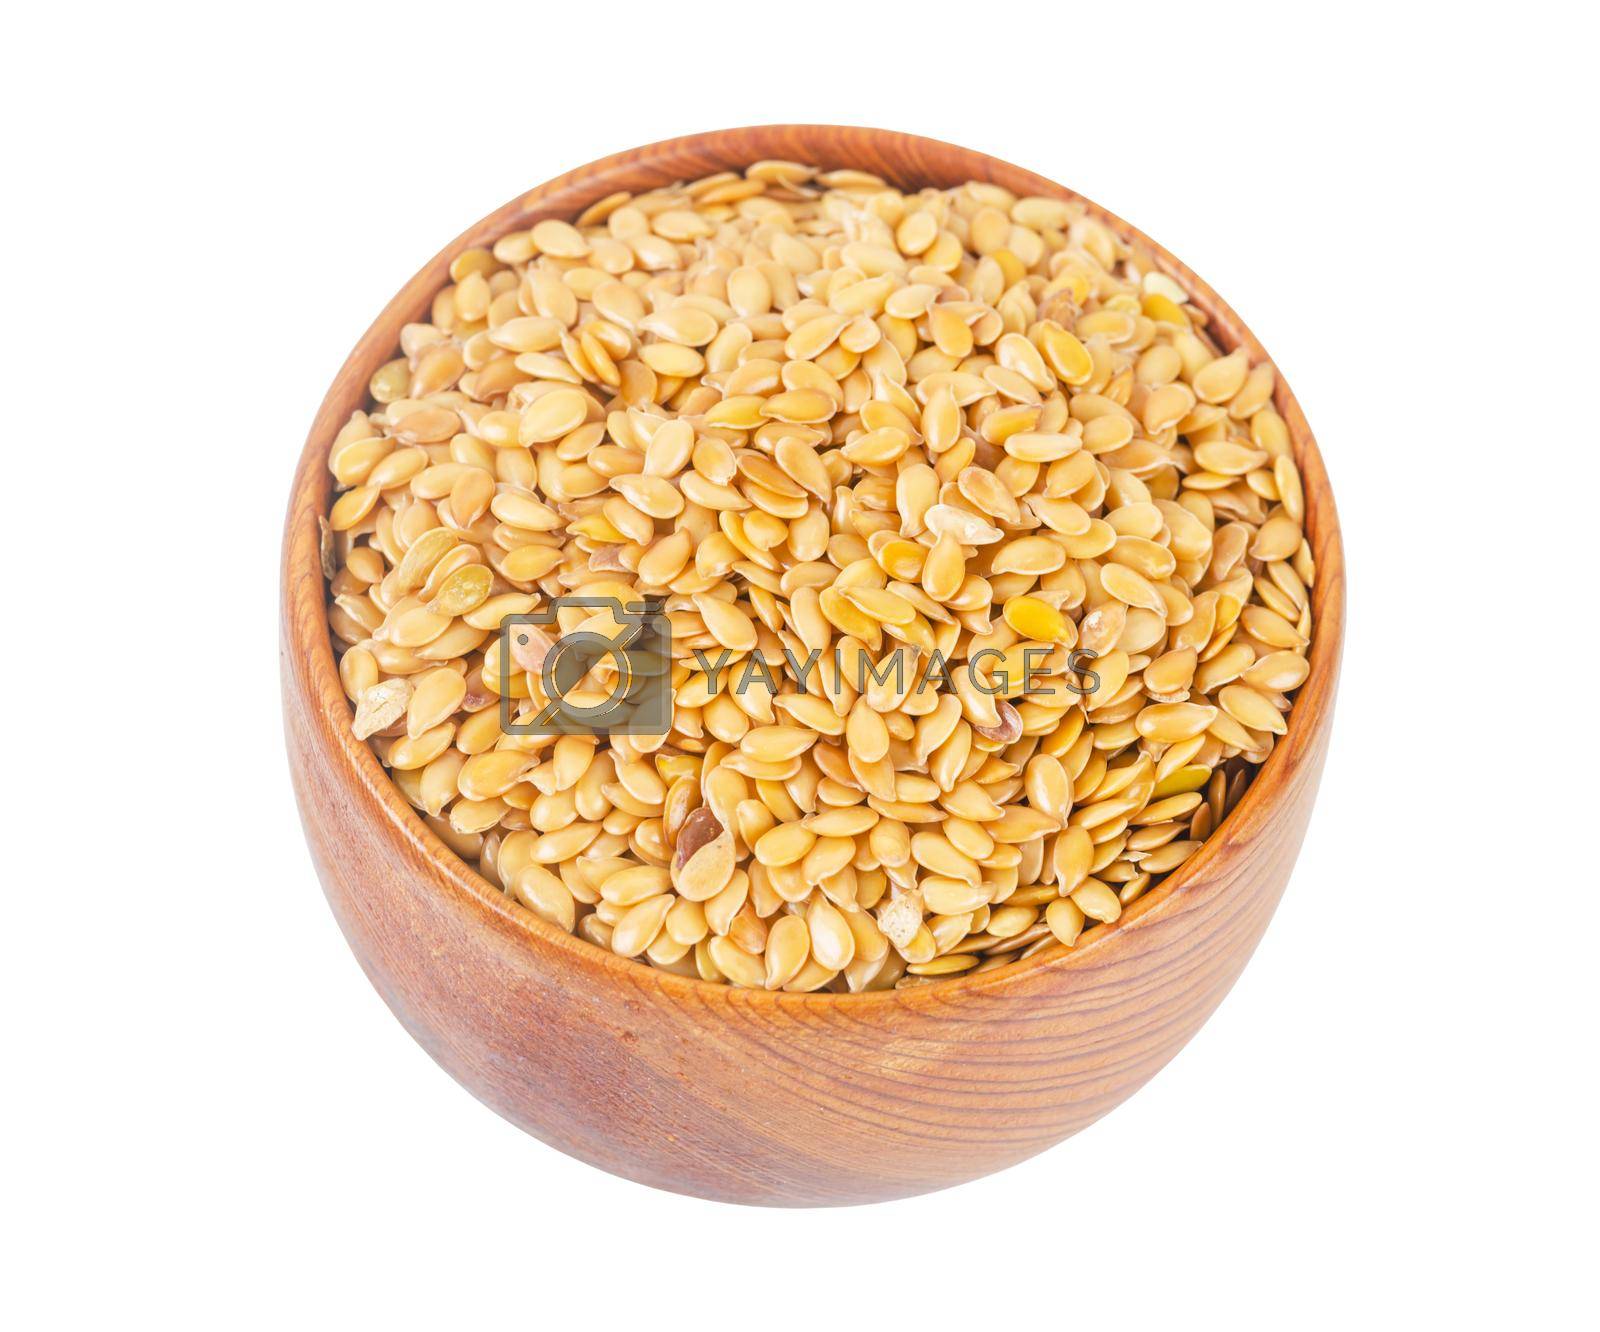 Royalty free image of Gold Flax seed in wooden bowl isolated on white background, Save clipping path. by Gamjai